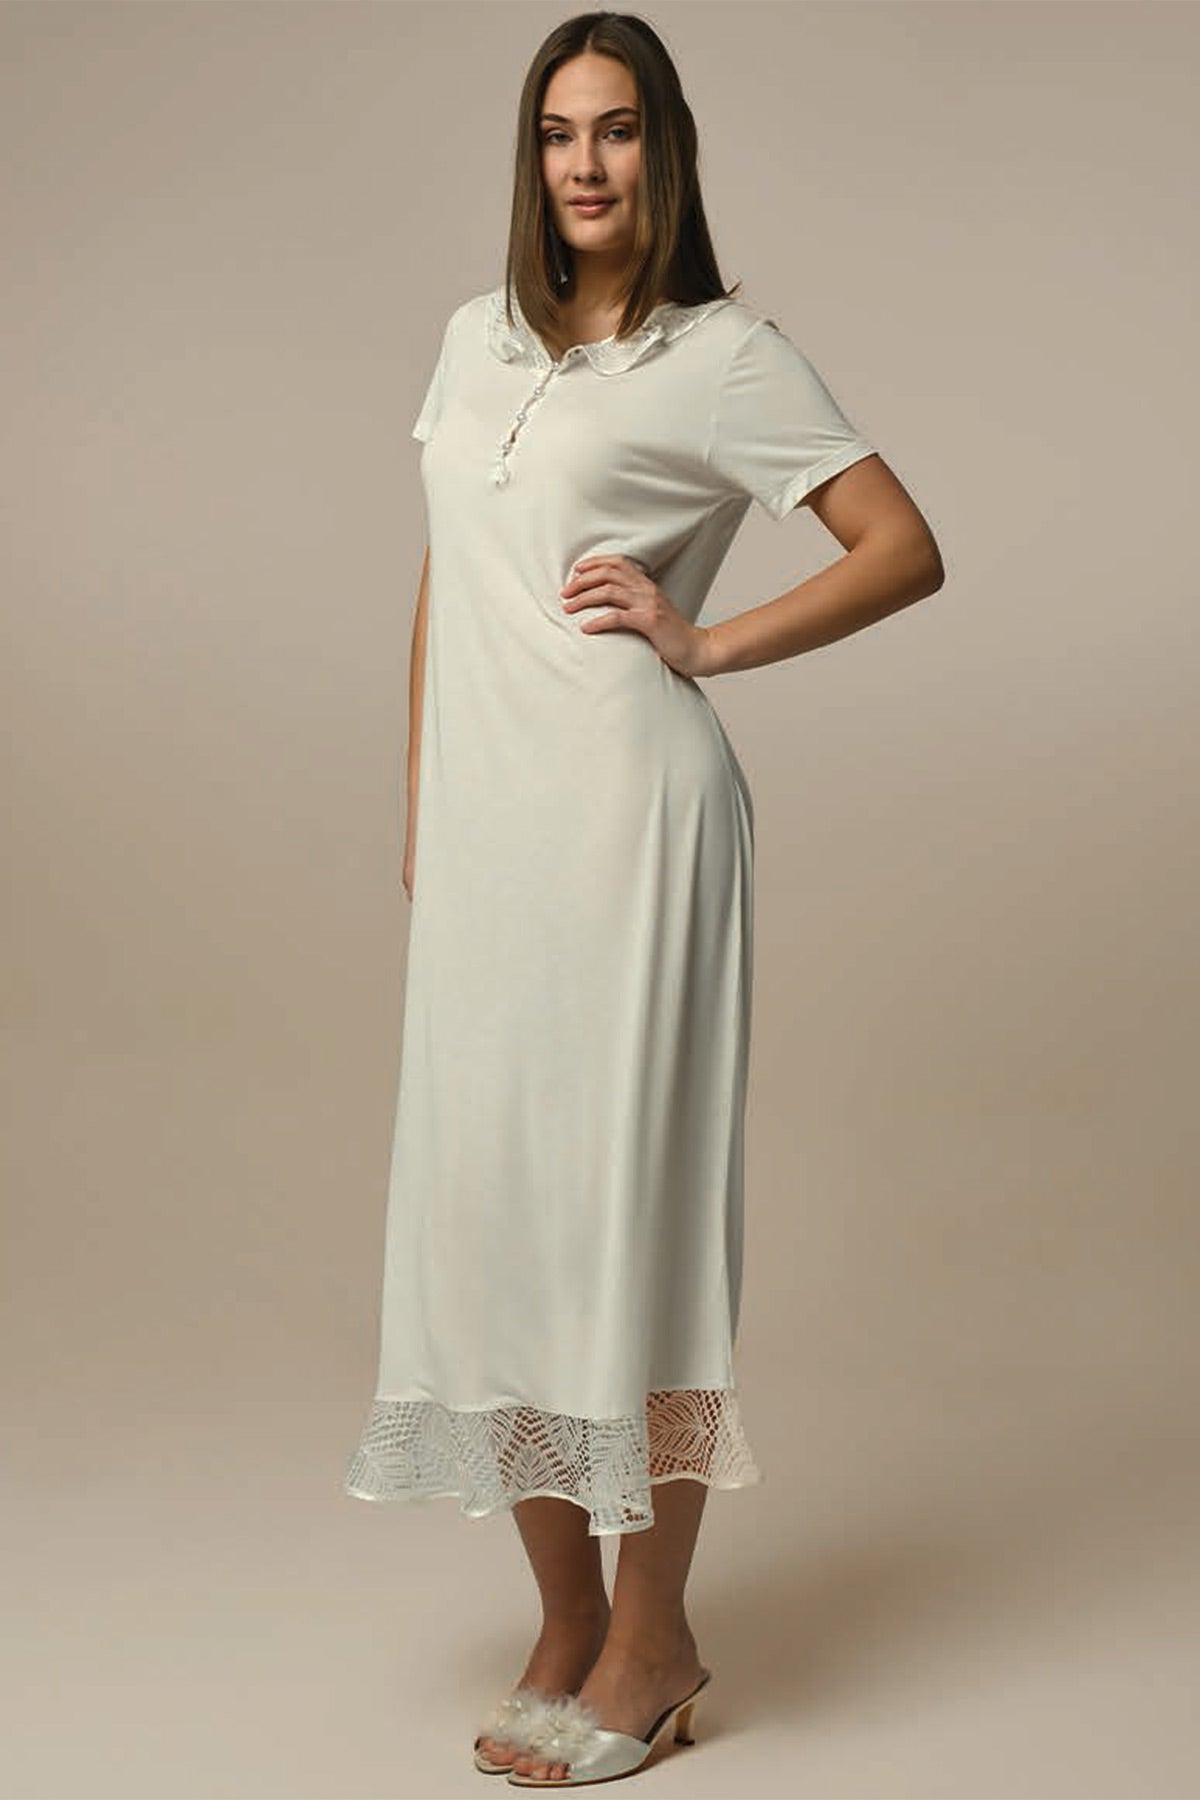 Lace Skirt Maternity & Nursing Nightgown With Robe Ecru - 24513